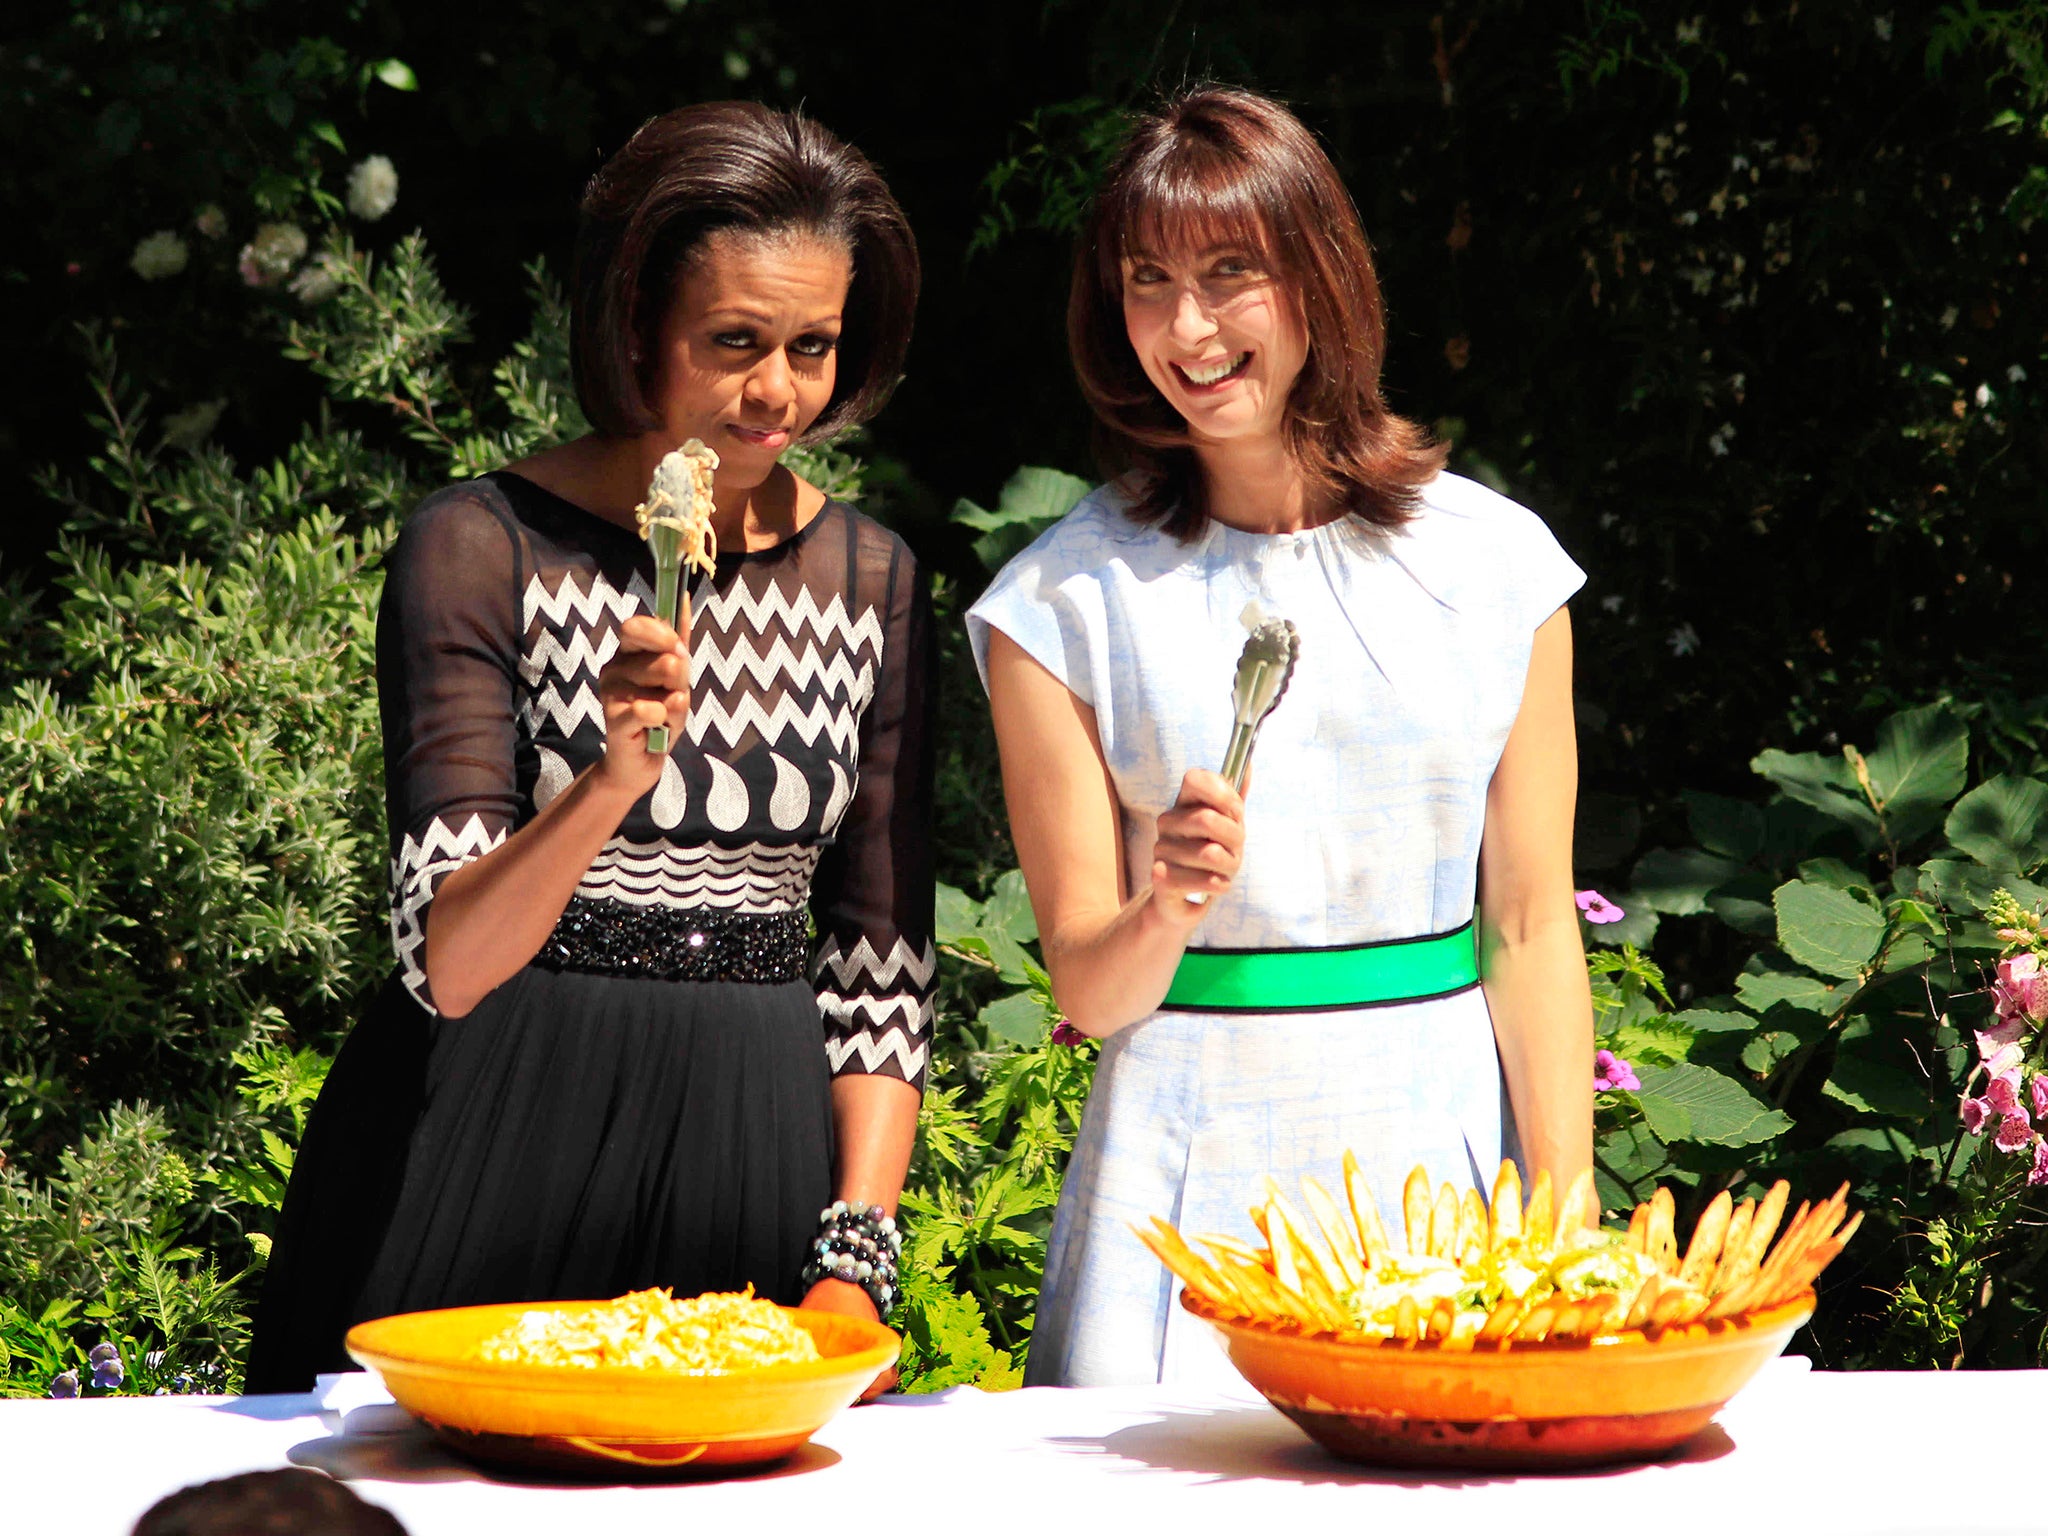 Michelle Obama and Samantha Cameron at a barbecue in the garden of 10 Downing Street in 2011